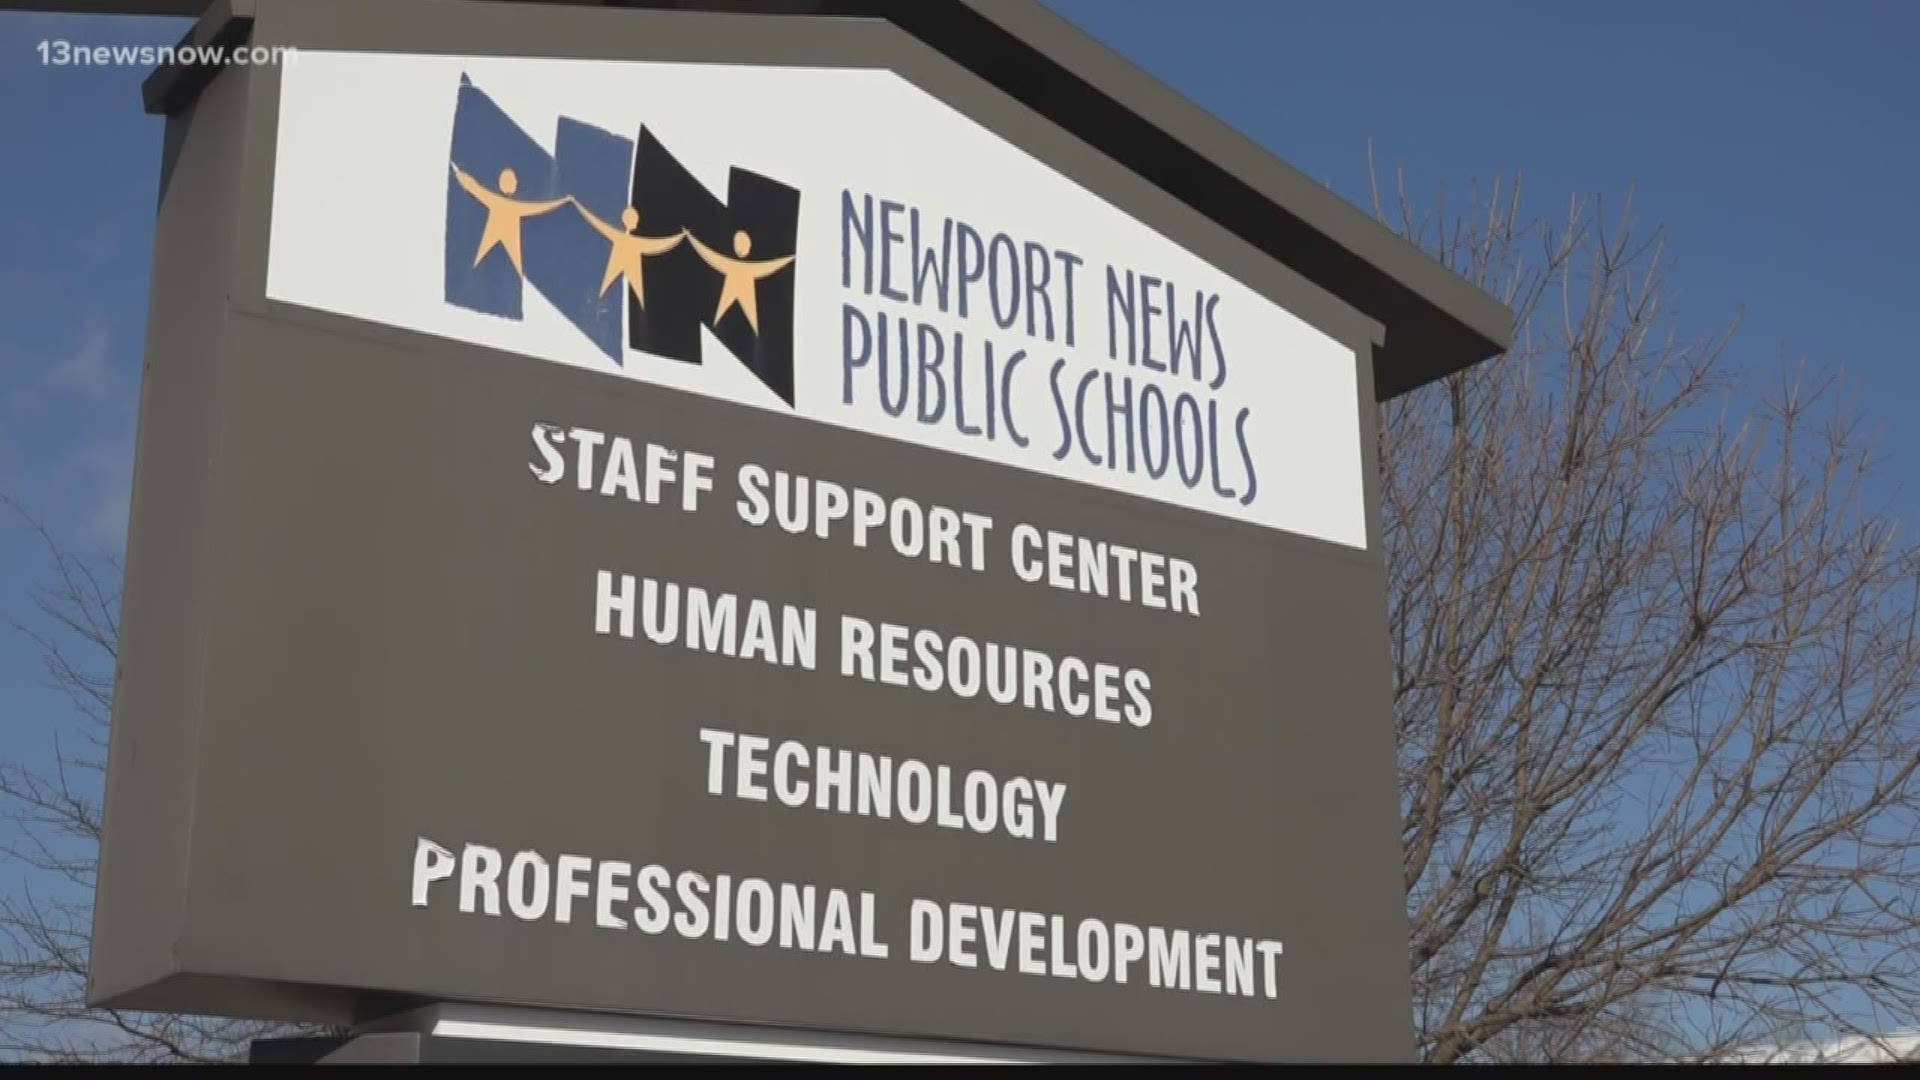 Any furloughed workers can apply to be a substitute teacher at Newport News Public Schools.